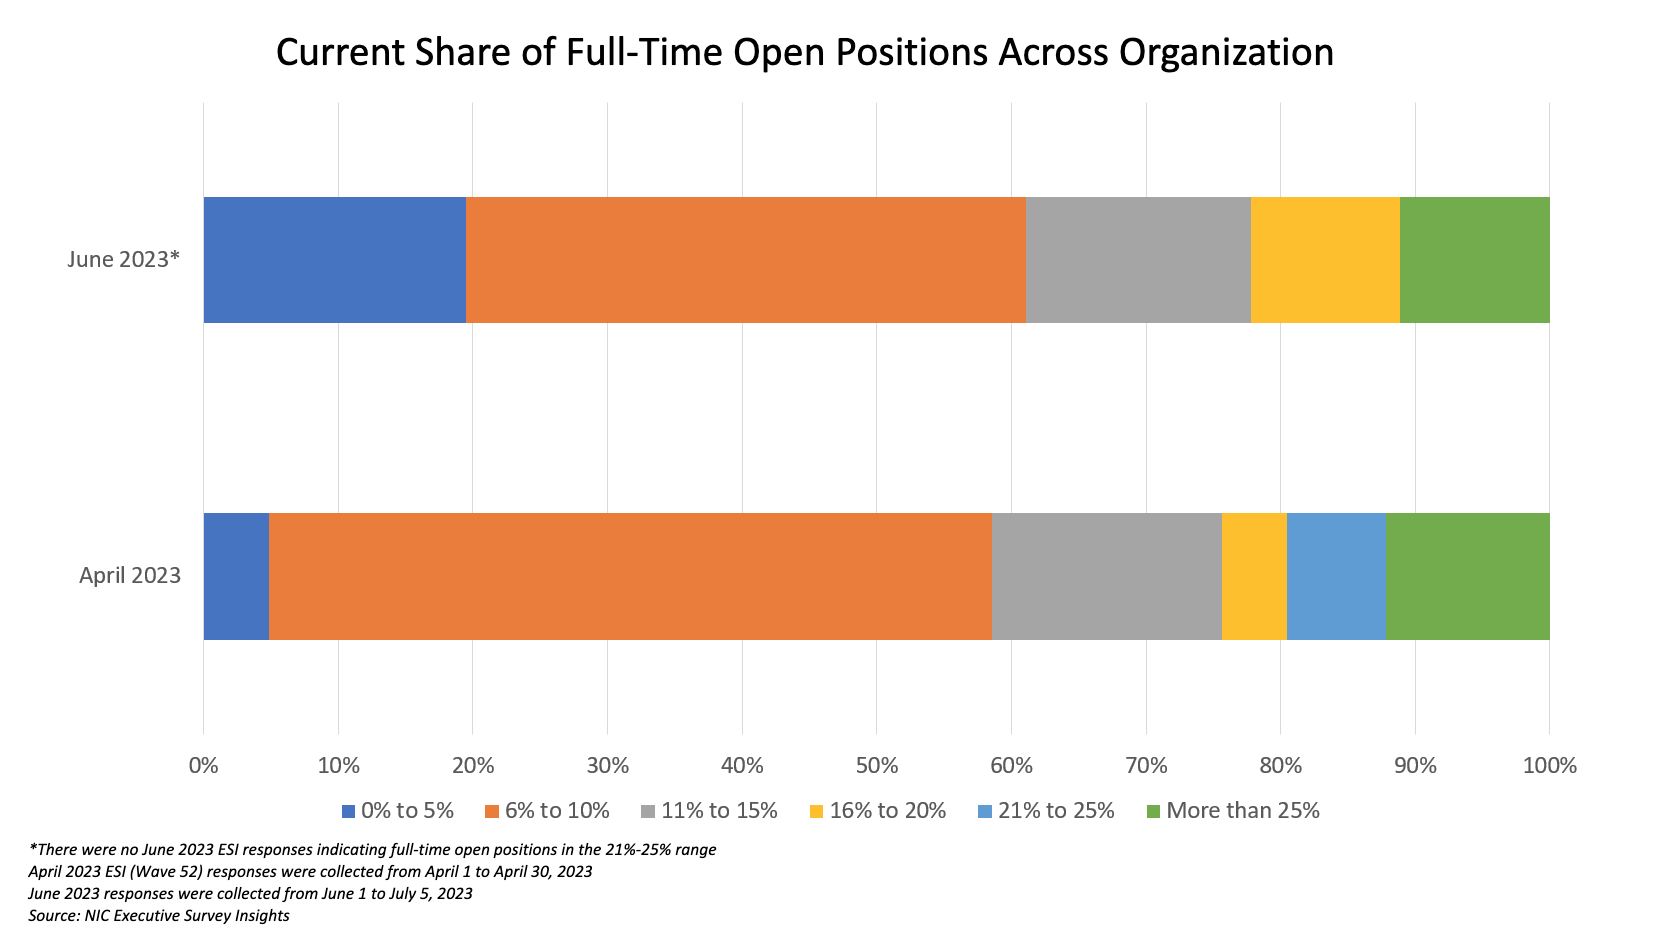 Current Share of Full-Time Open Positions comparison from April 2023 to June 2023, the responses indicate there has been improvement in the number of open positions that are impacting communities.